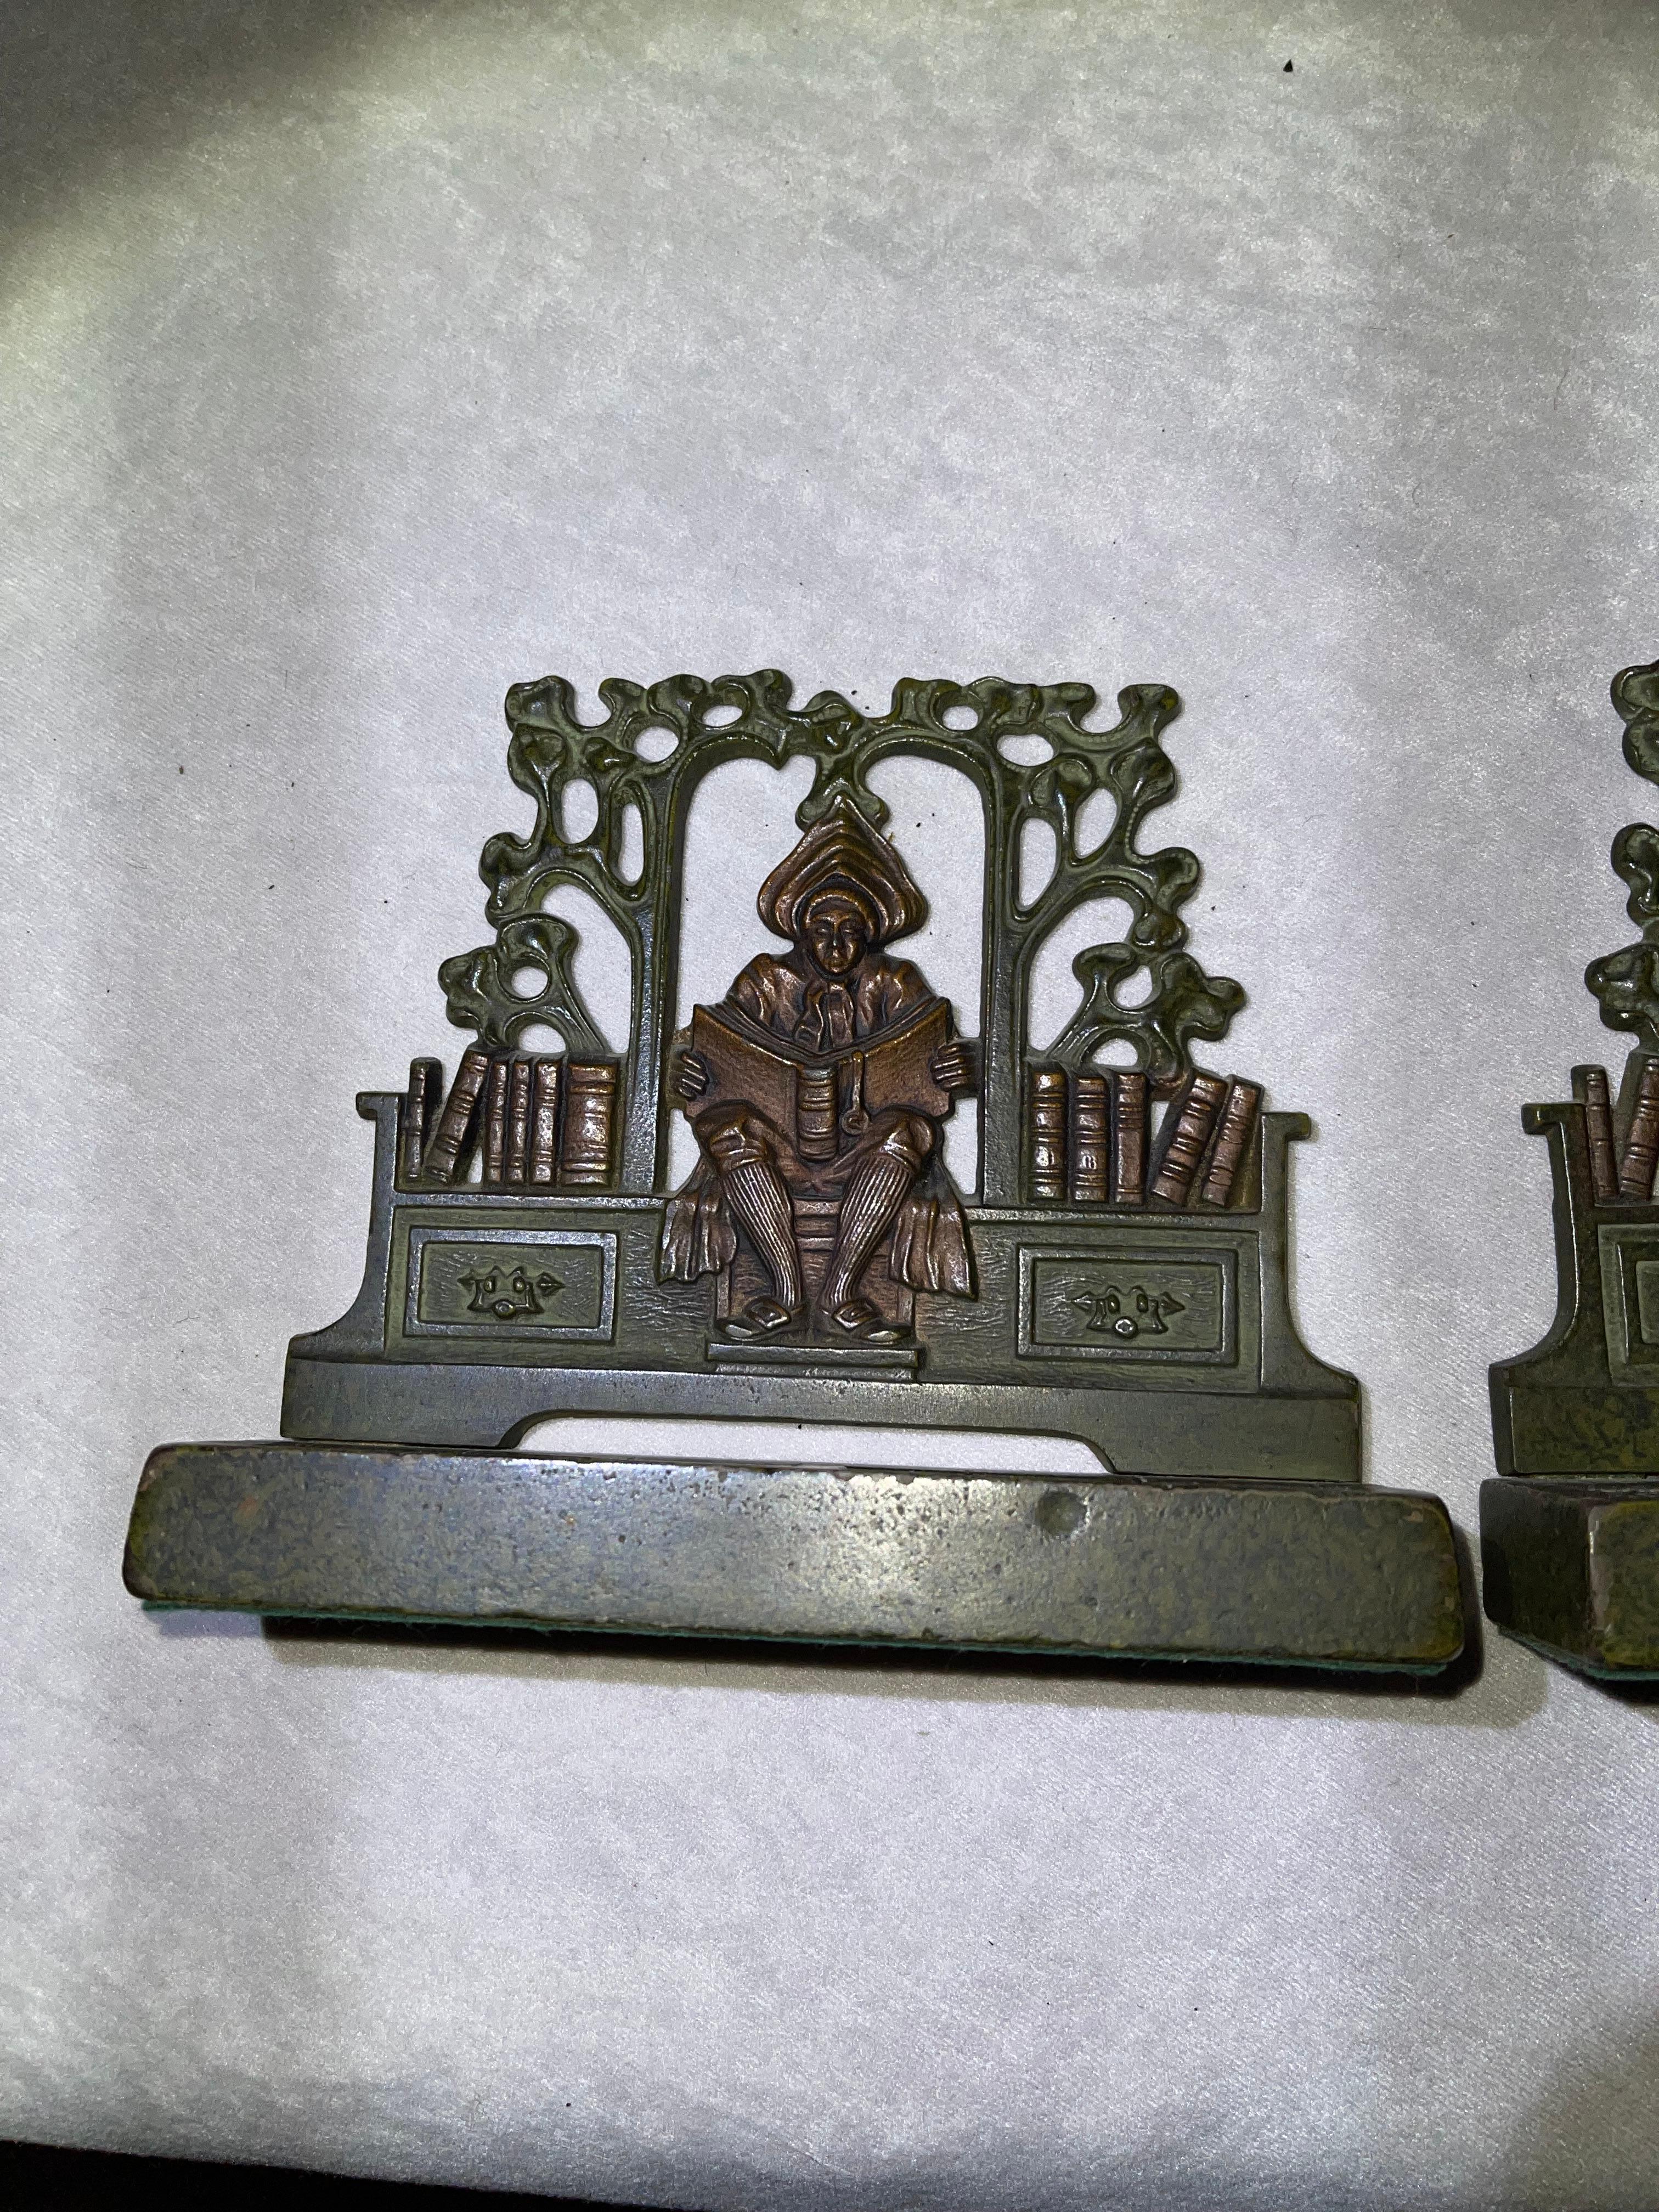 These bookends were done by the great makers Judd Co. Amazingly the factory label underneath is still intact and reads 